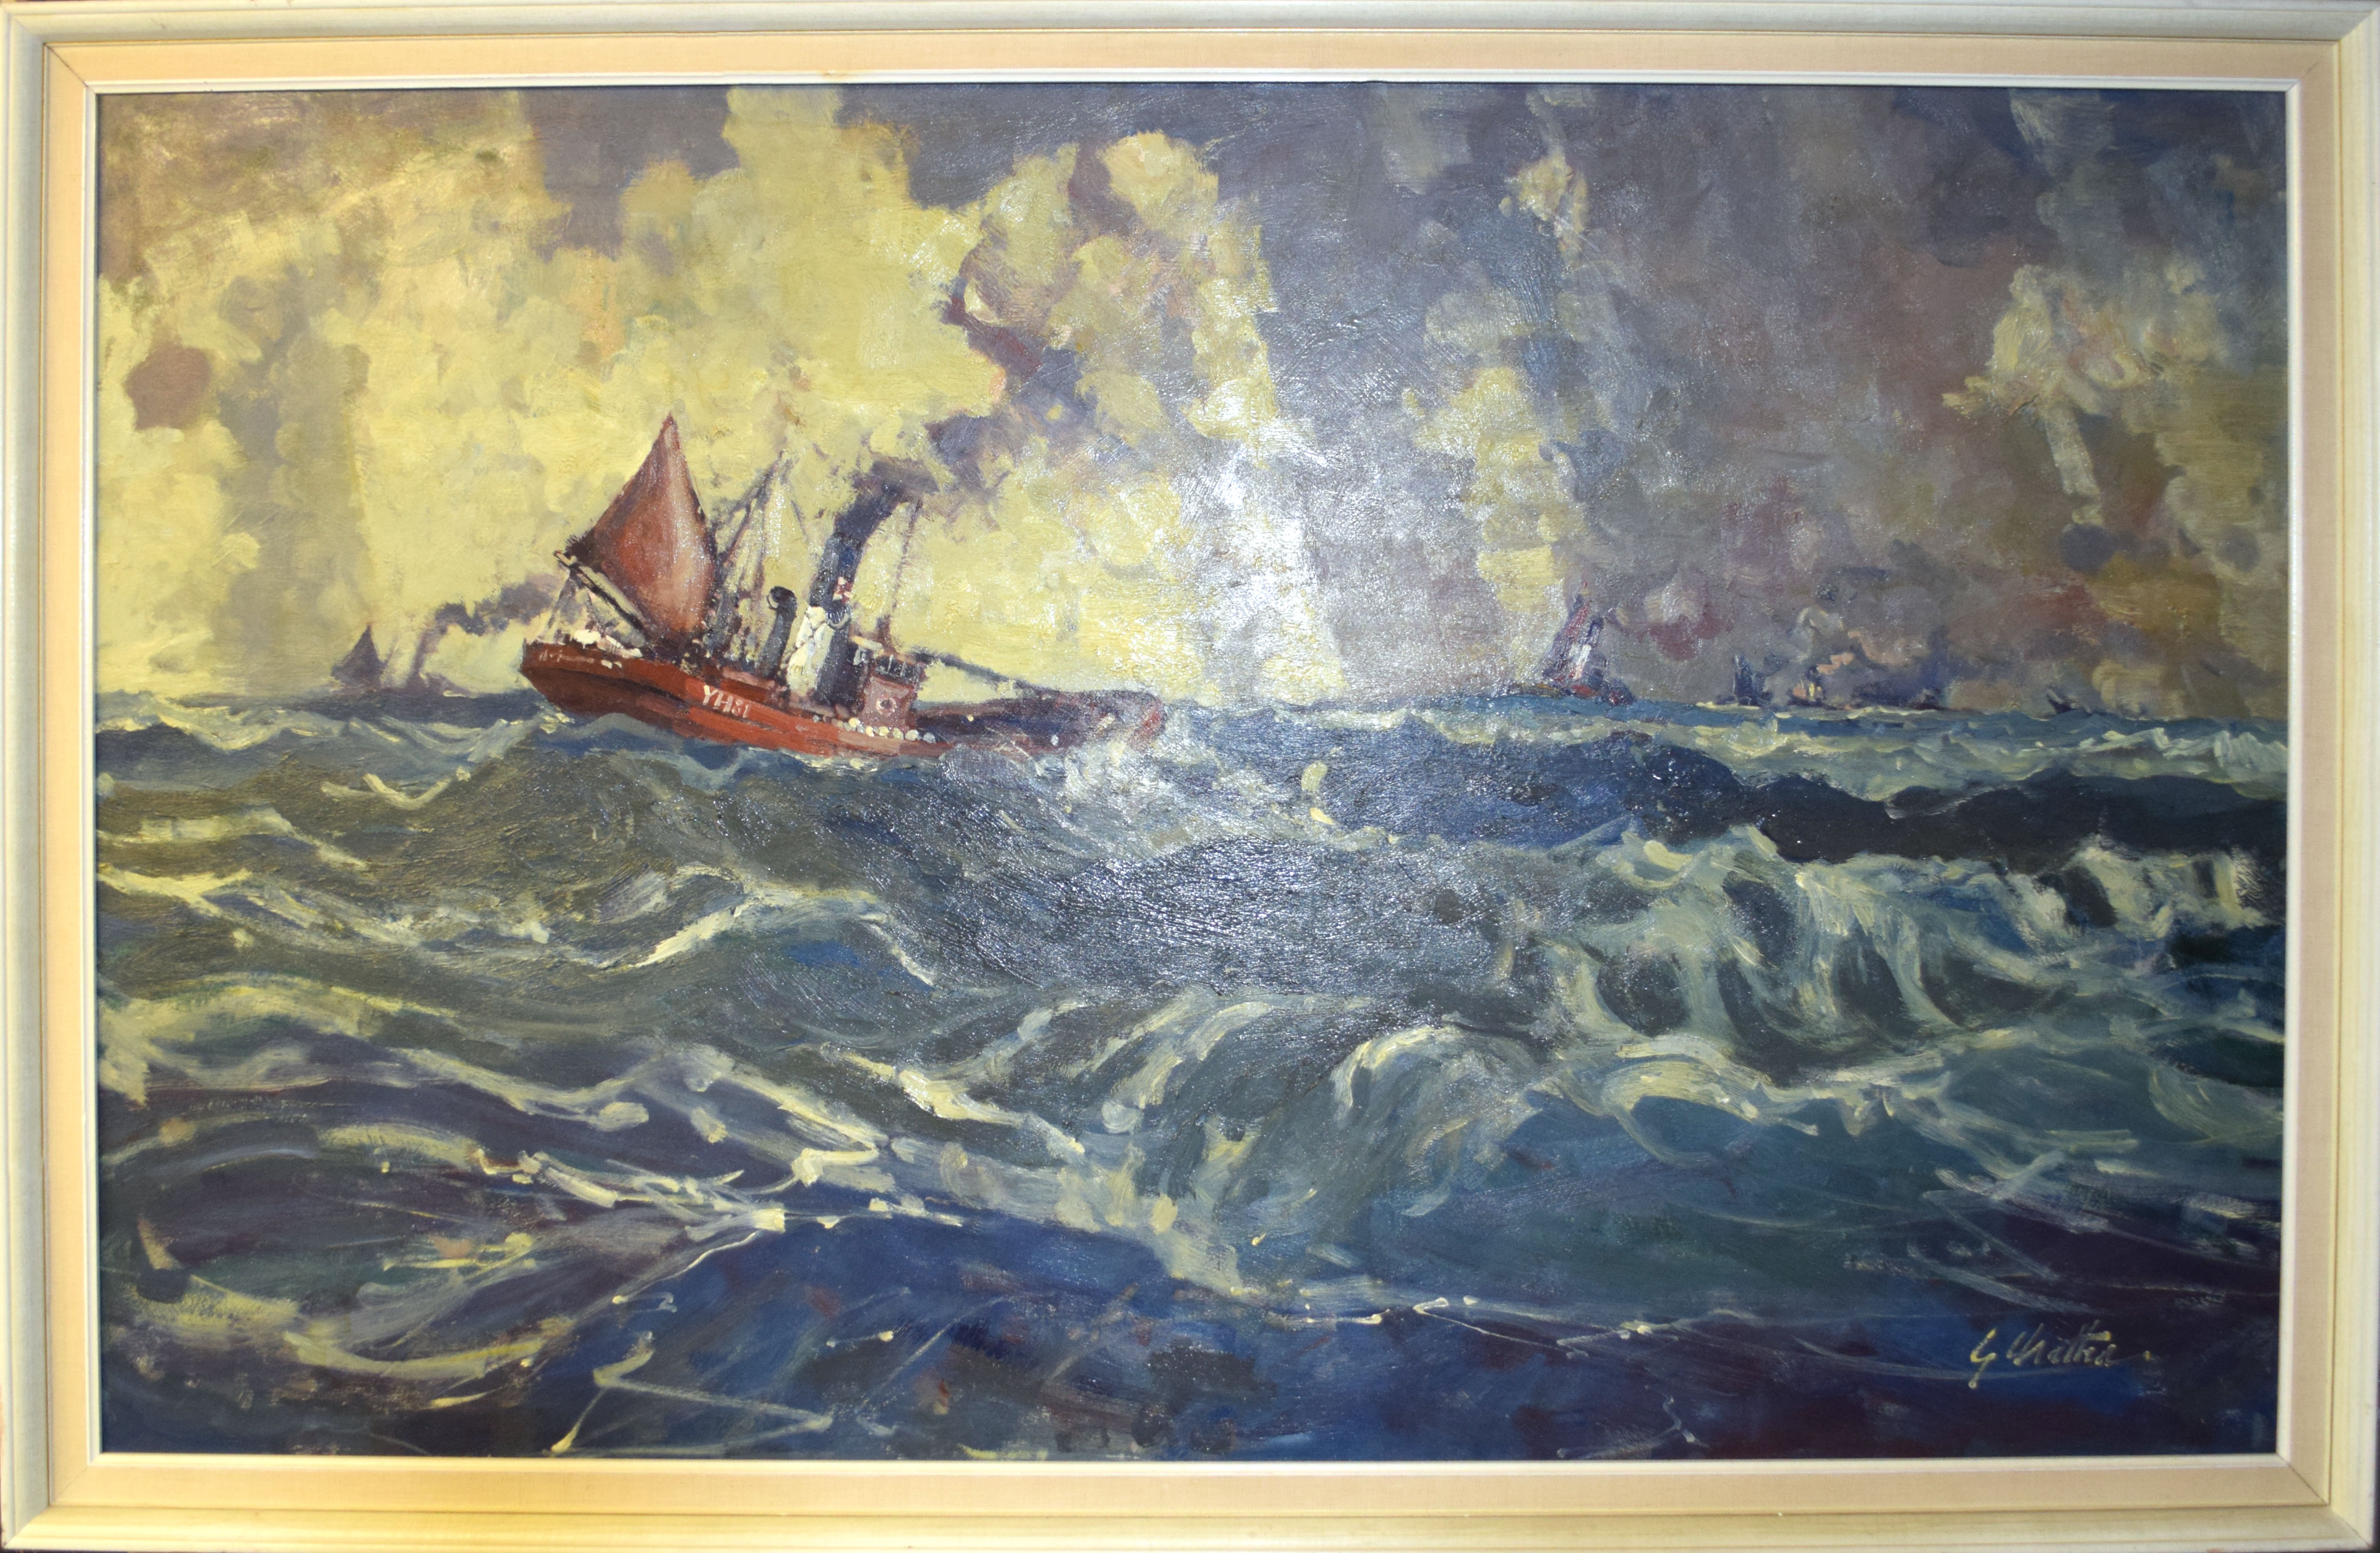 Geoffrey Chatten, Seascape with YH 81 at sea, oil on board, signed lower right, 74 x 120cm